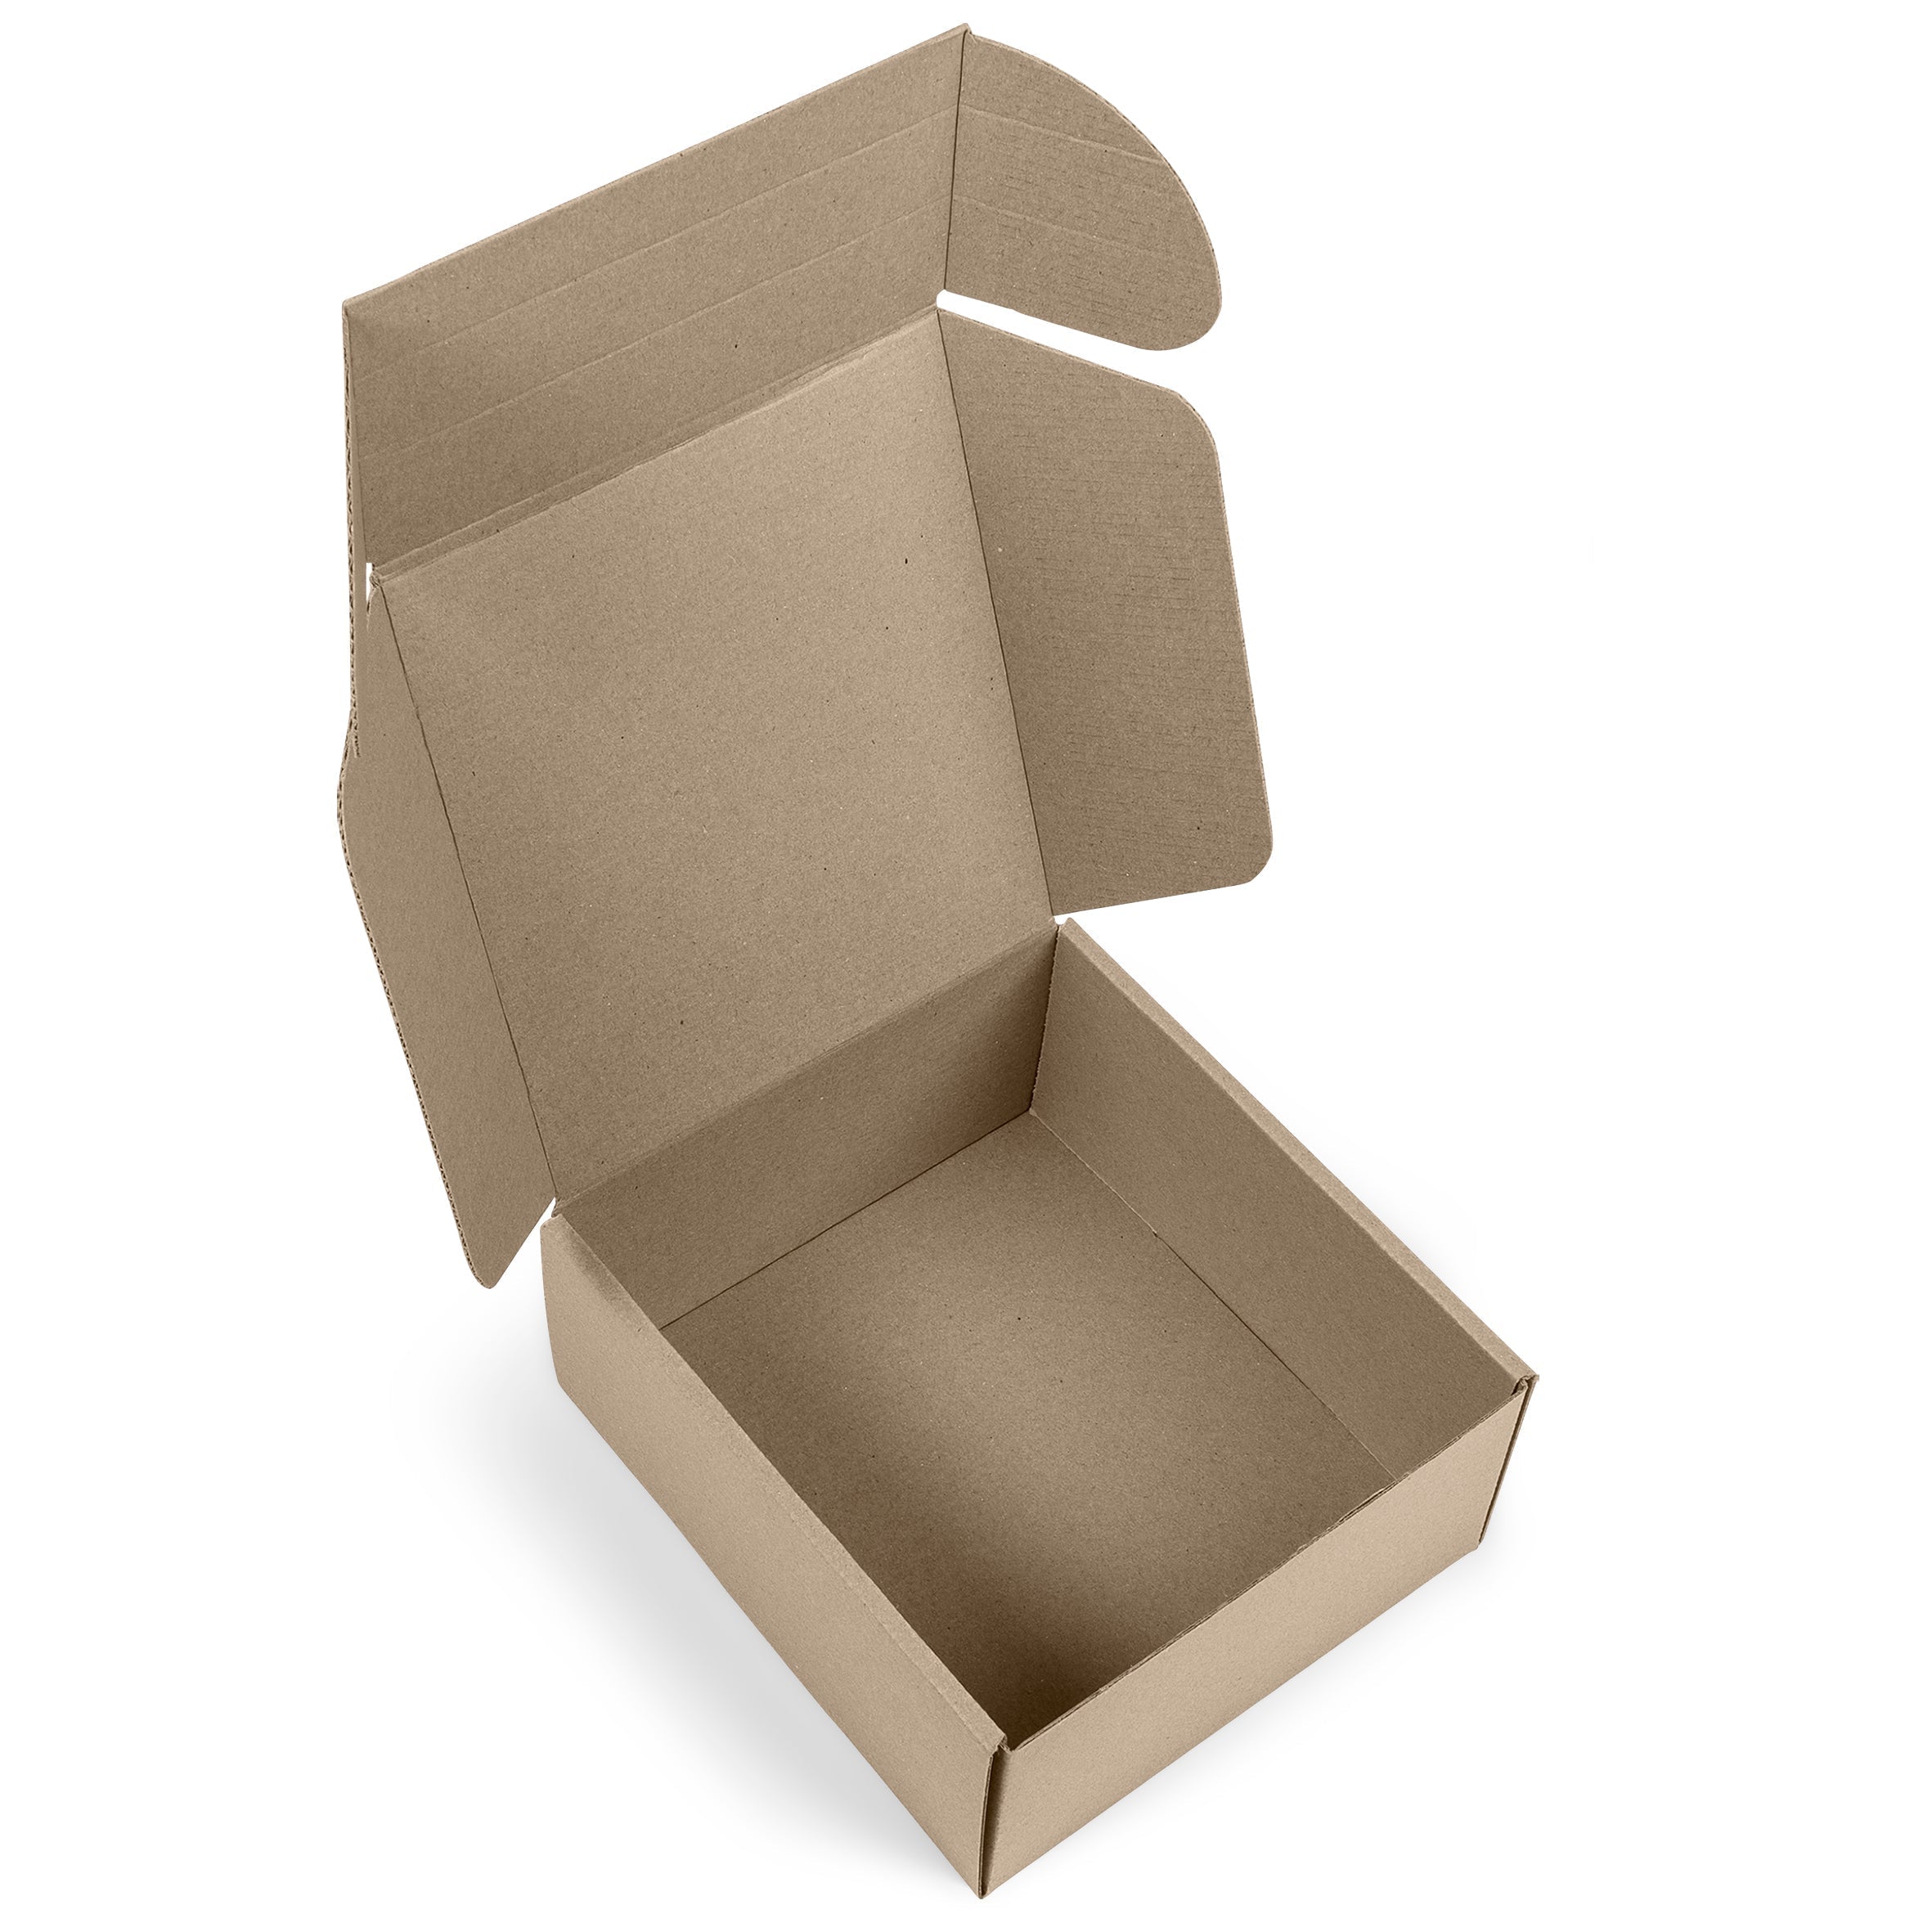 Corrugated cardboard gift box shown in an open position and unbranded..